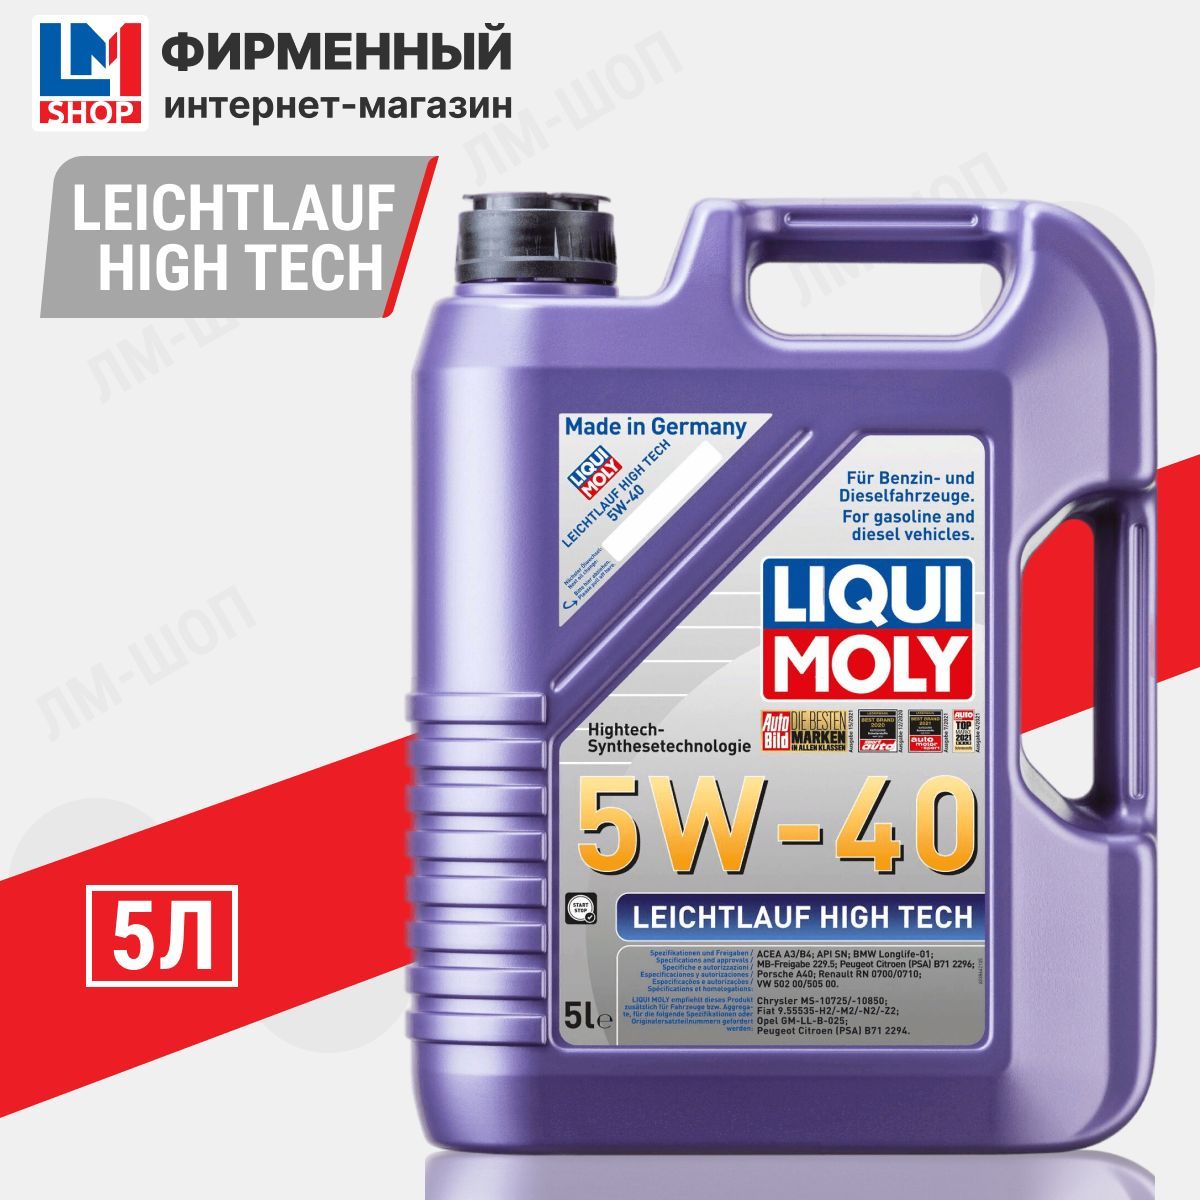 Масло Rowe 10w40 HC-synthese HC-Synthetic super Leichtlauf HC-0. Масло 5w40 Leichtlauf High Tech отзывы. Суика Лики Молли. Масло моли 5w40 отзывы